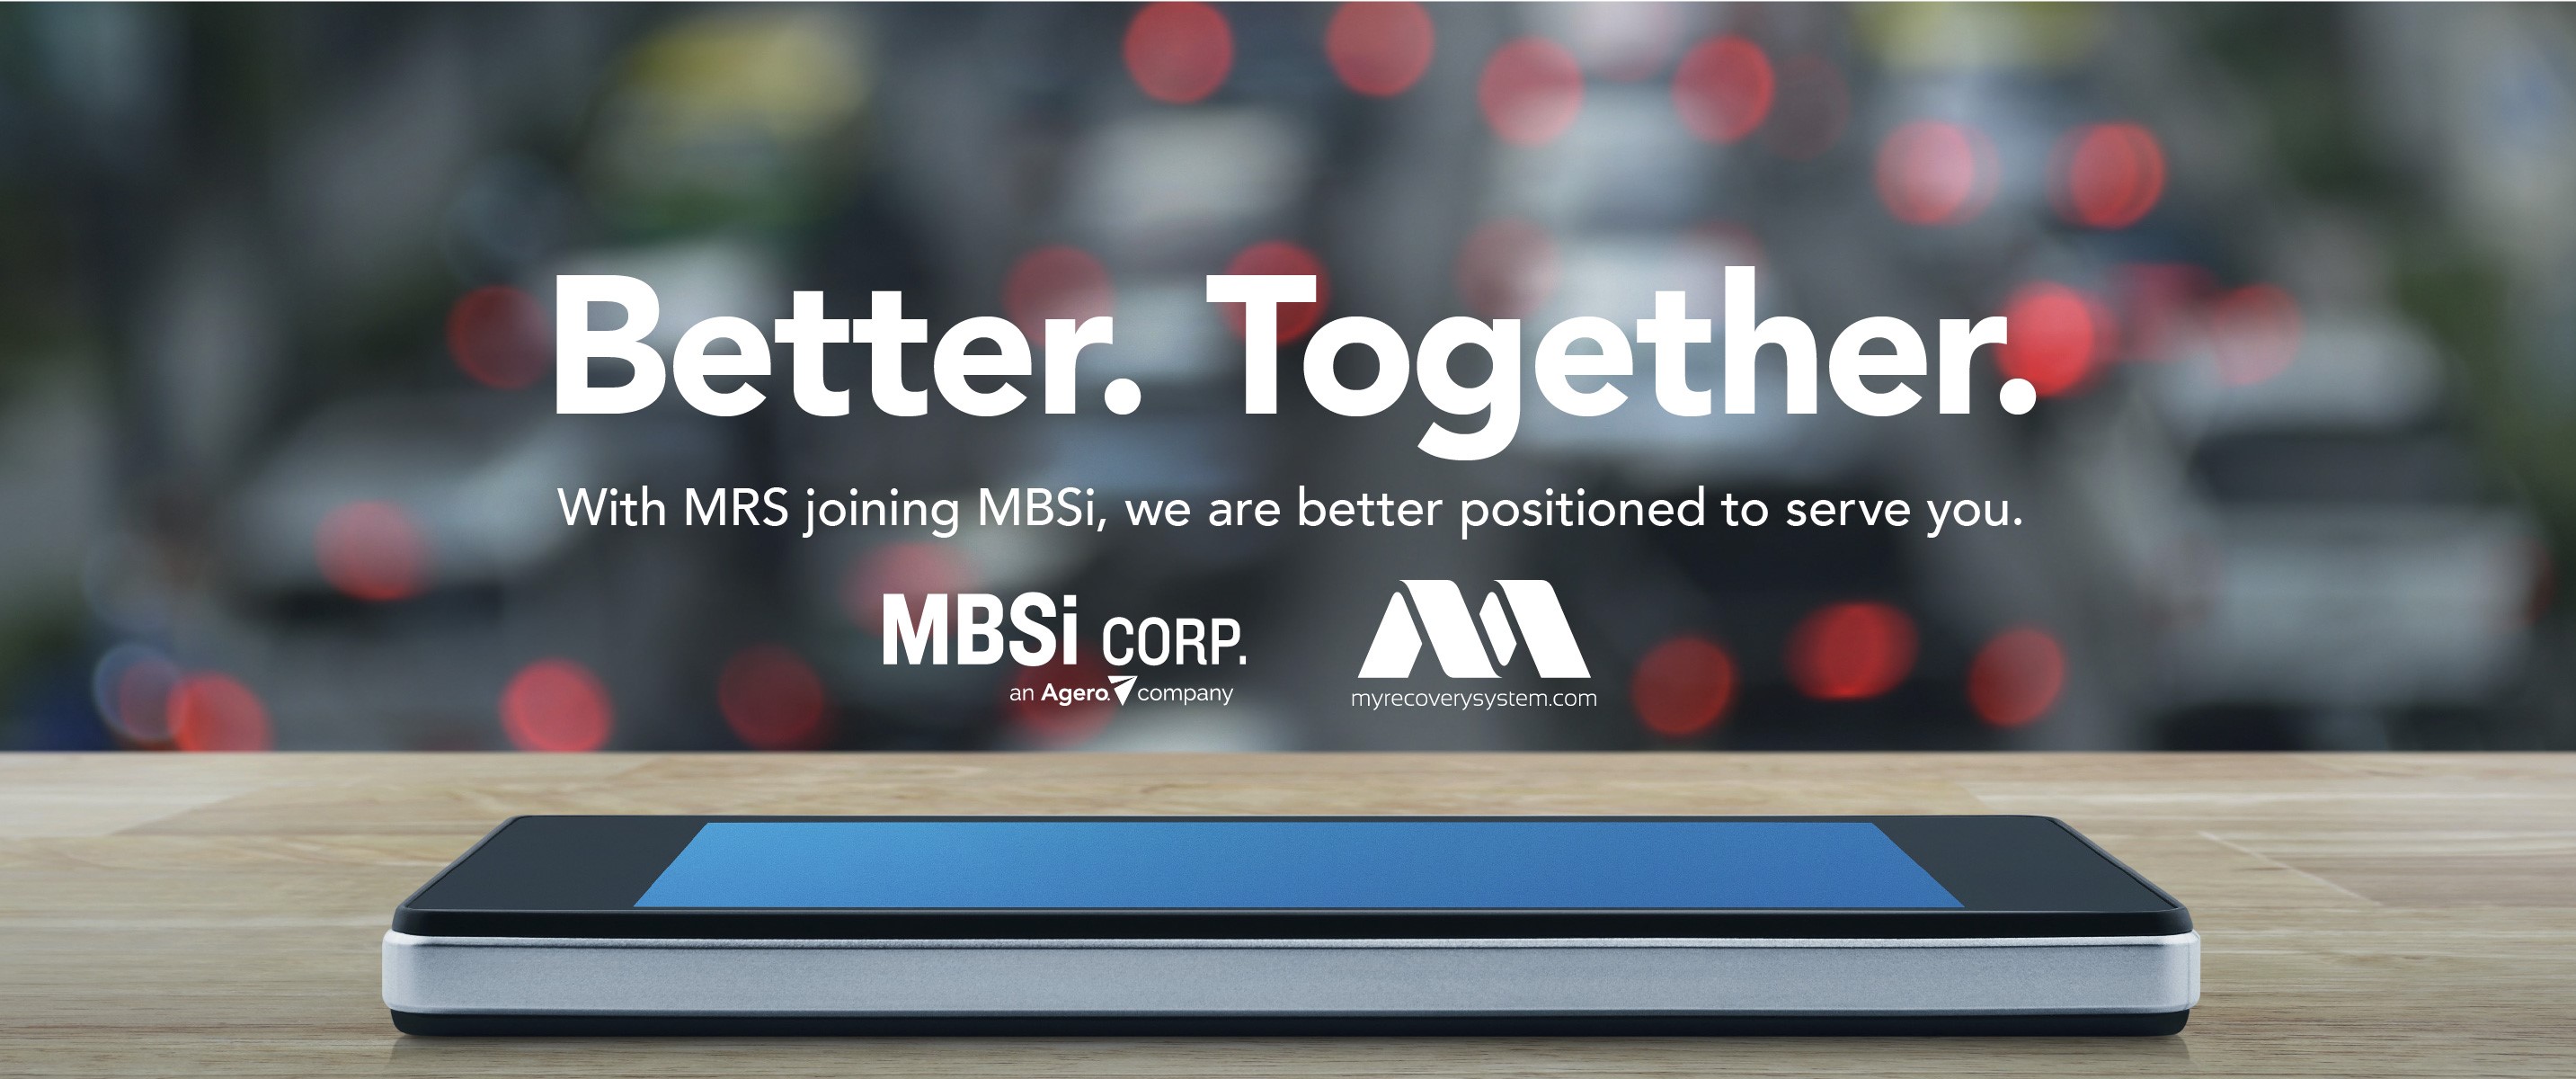 MBSi Strengthens Software Offering with Acquisition of My Recovery System and Vendor Transparency Solutions